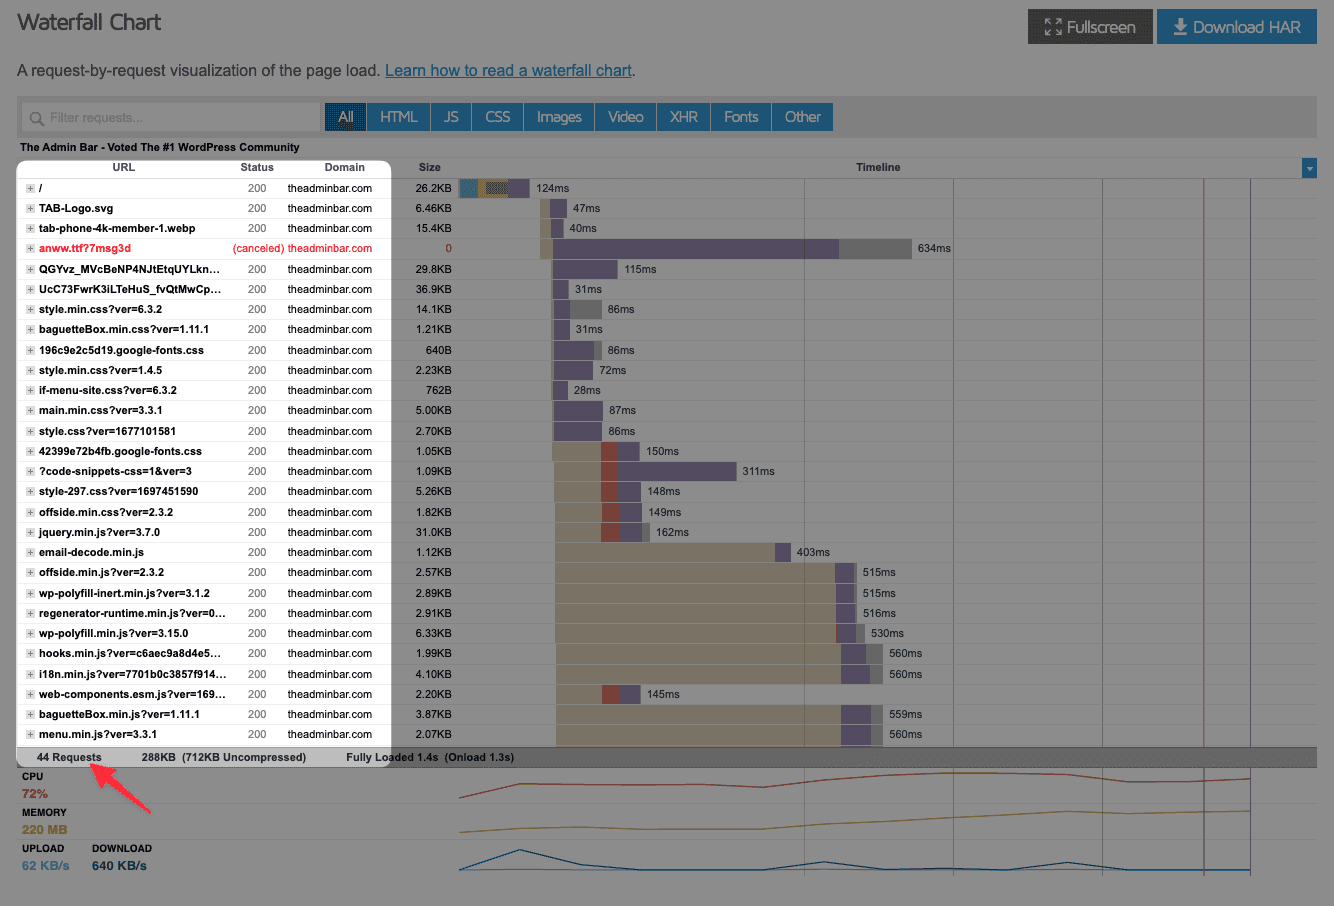 A screenshot of the requests inside the waterfall chart